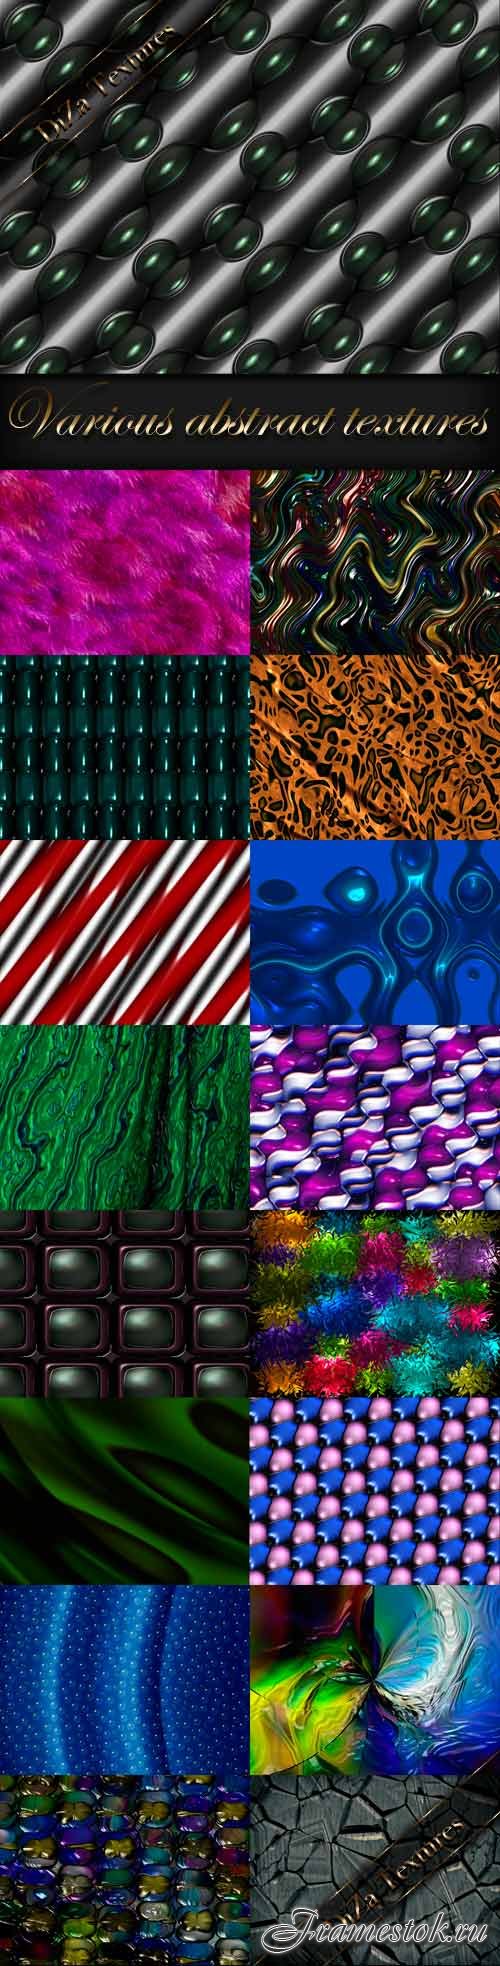 Various abstract textures 